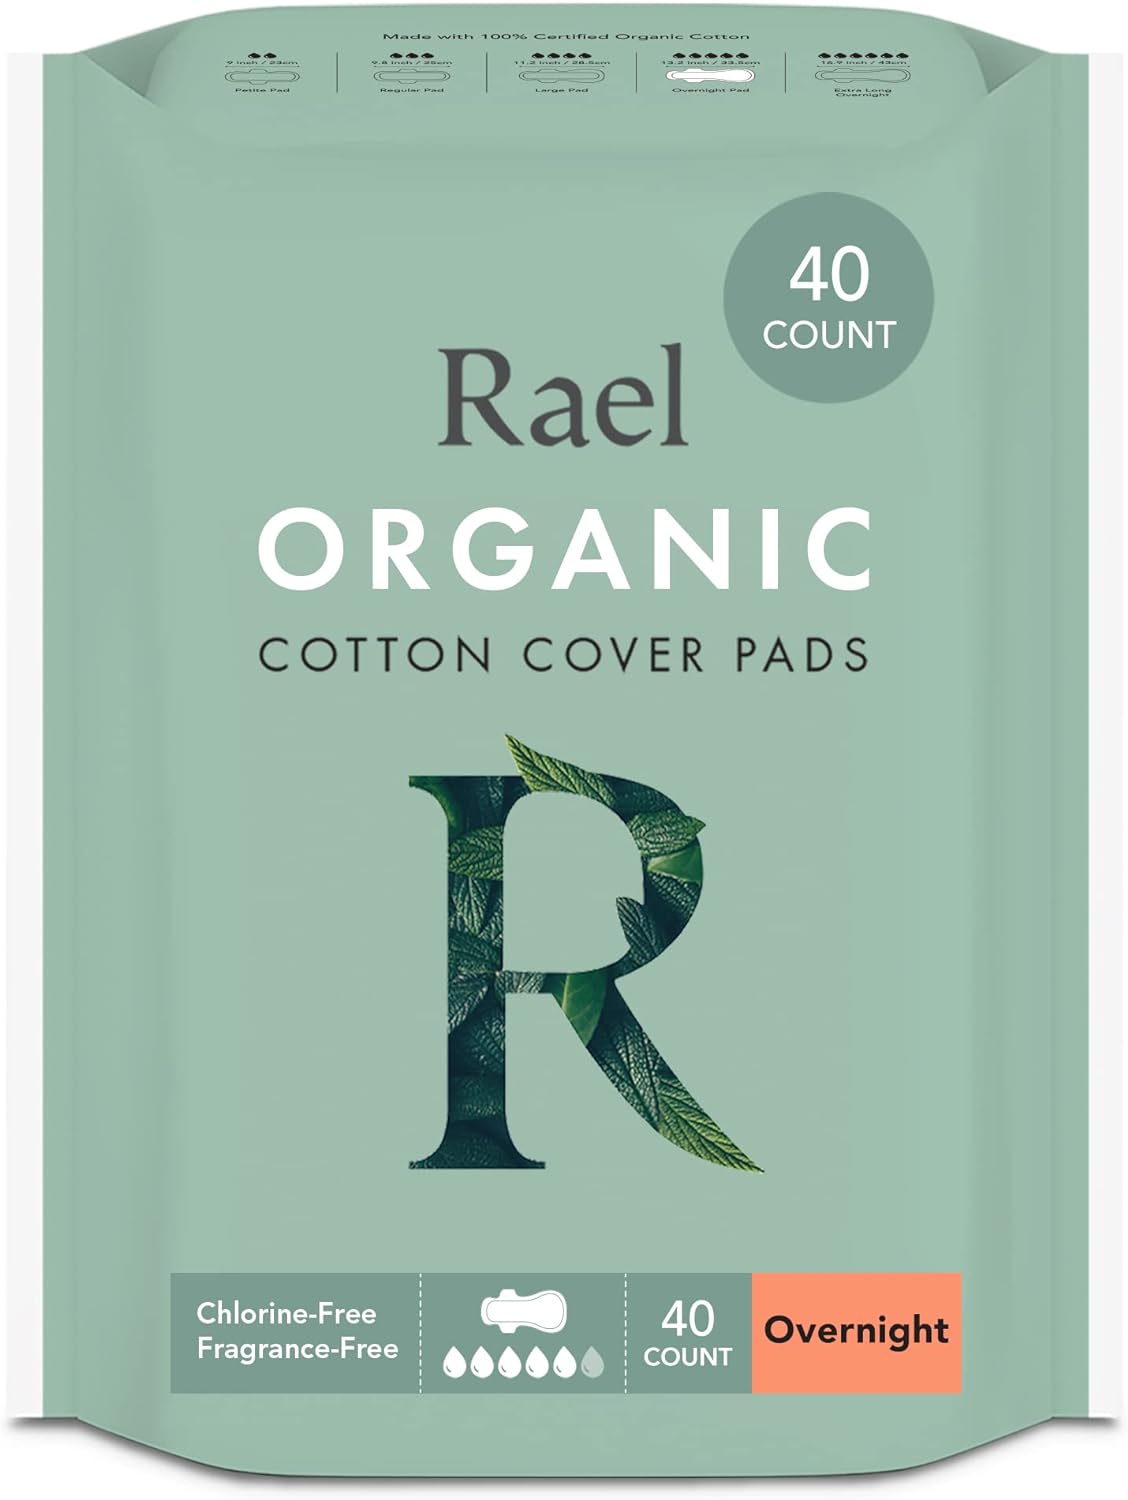 Rael Organic Cotton Cover Pads, best pads for heavy flow